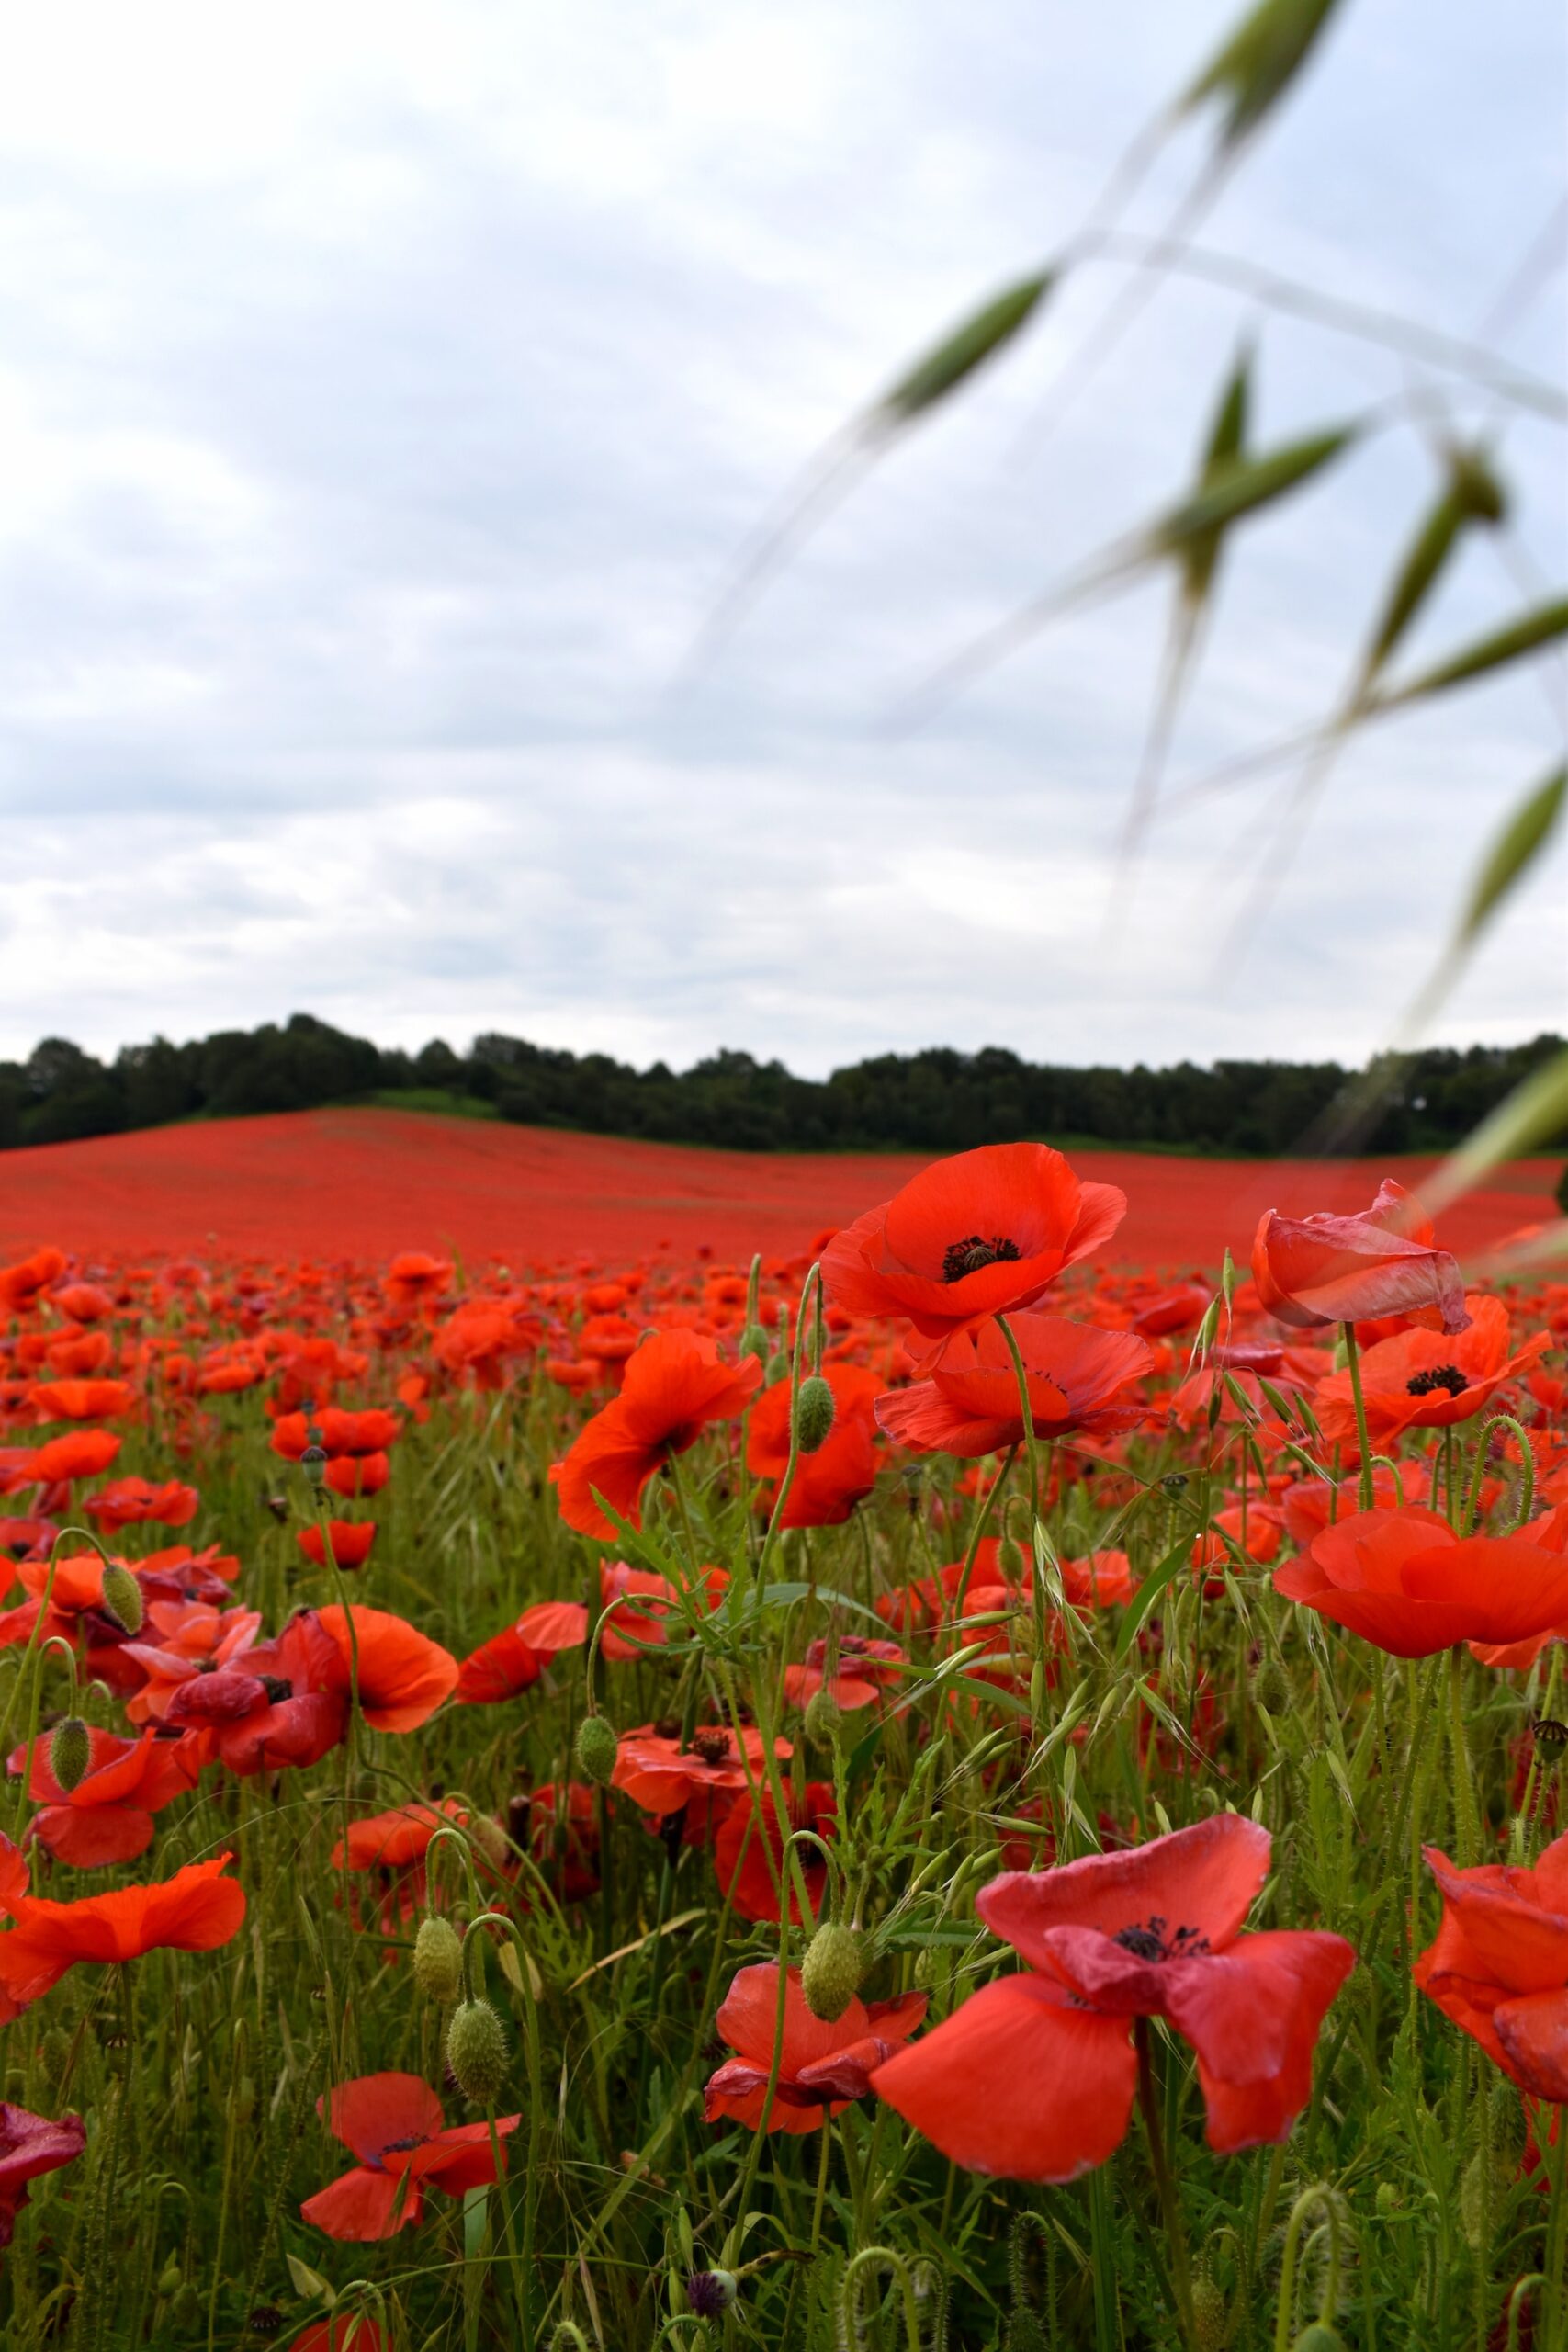 Are you suffering from tall poppy syndrome in the office? 